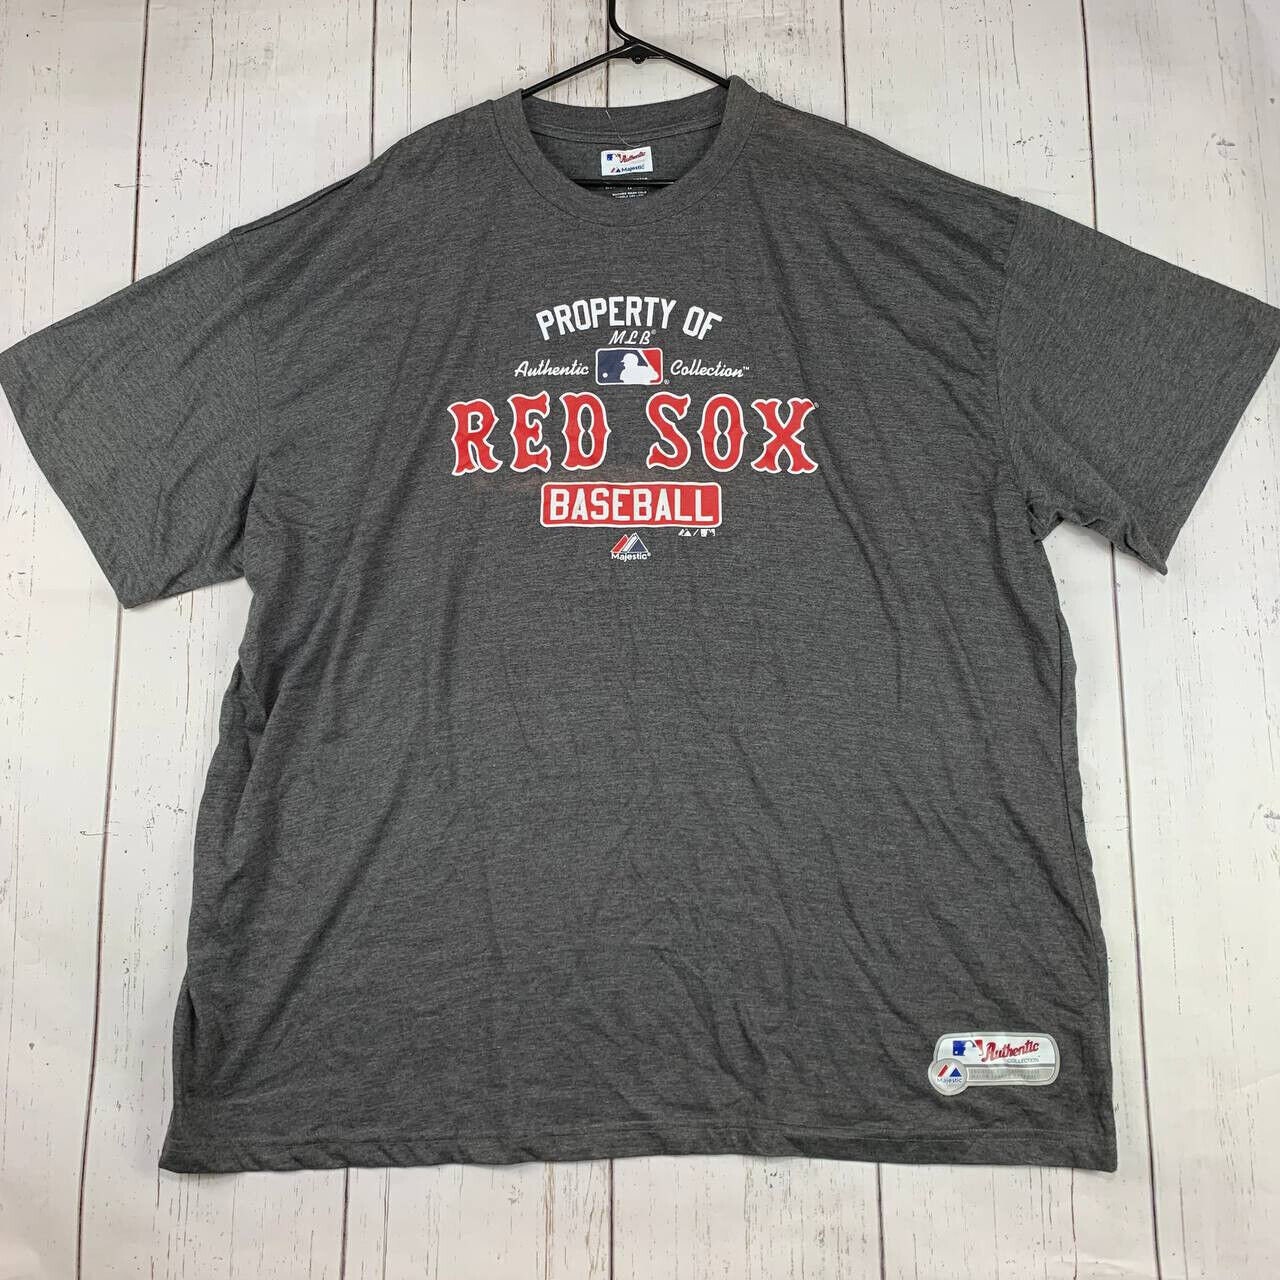 Majestic Boston Red Sox Navy Blue Graphic T-Shirt Women's Size XL